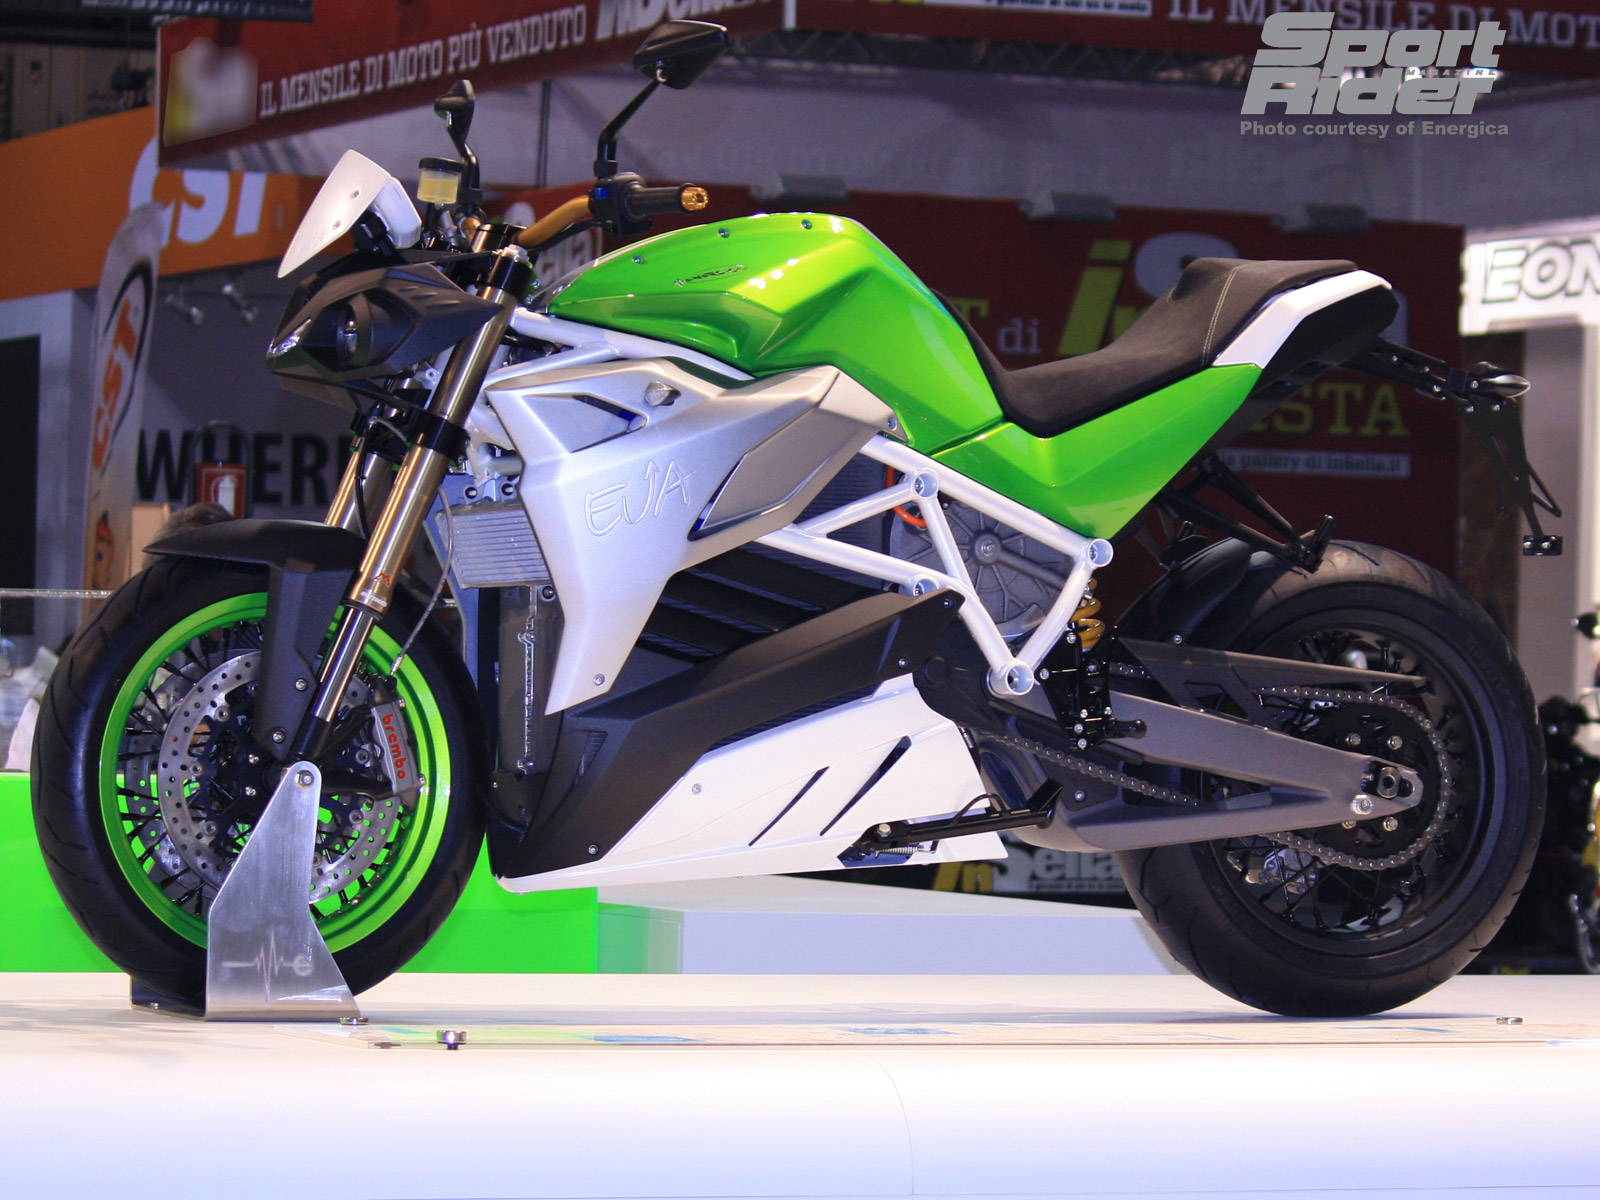 Electric Motorcycles News tests Energica Eva